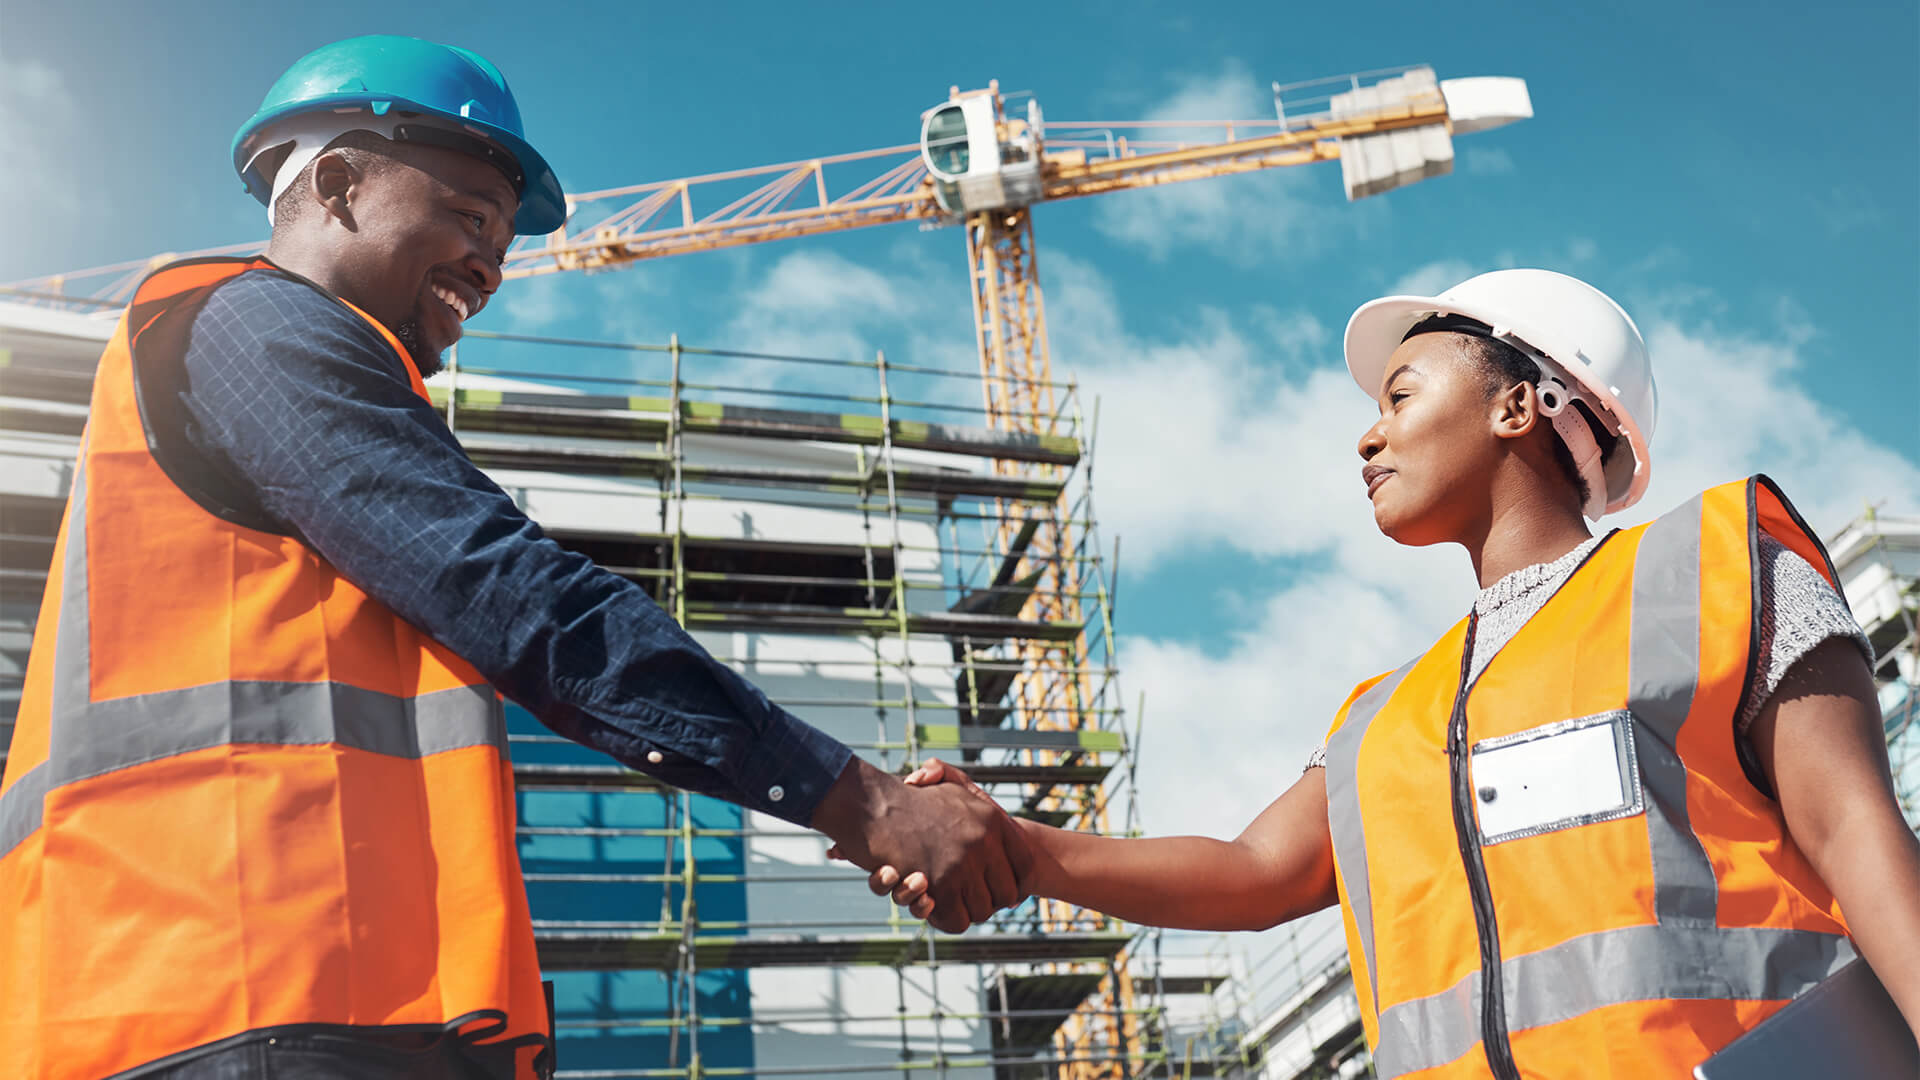 Shot of two builders shaking hands at a construction site.